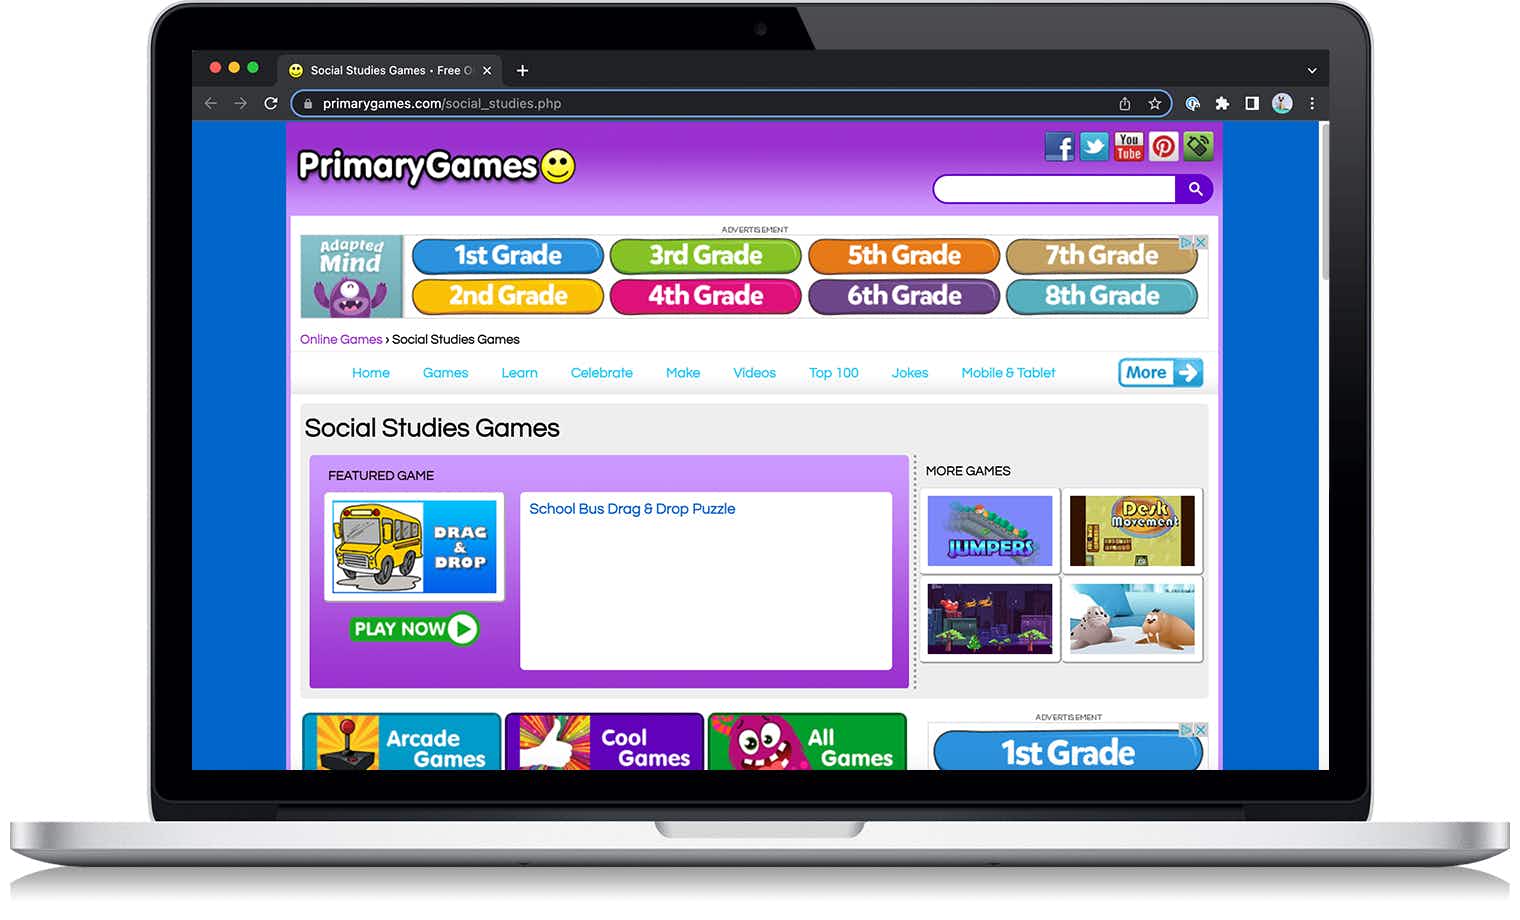 A screenshot from the PrimaryGames social studies games website on a laptop